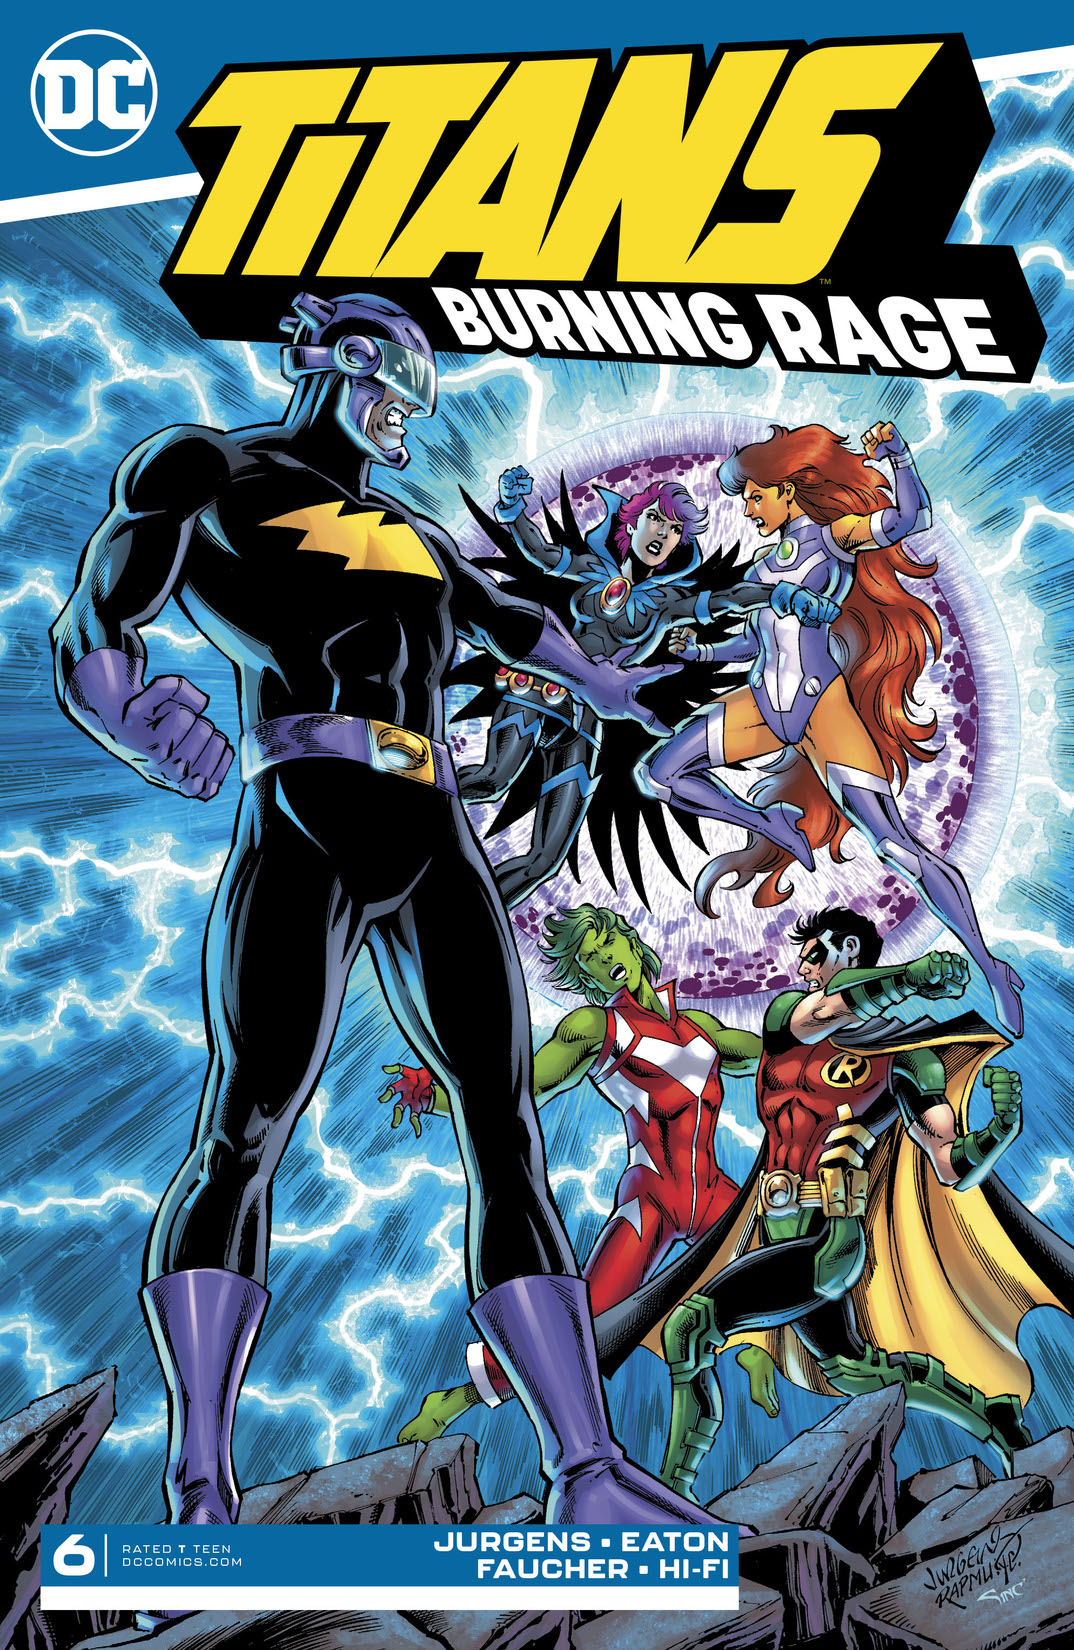 Titans: Burning Rage #6 preview images